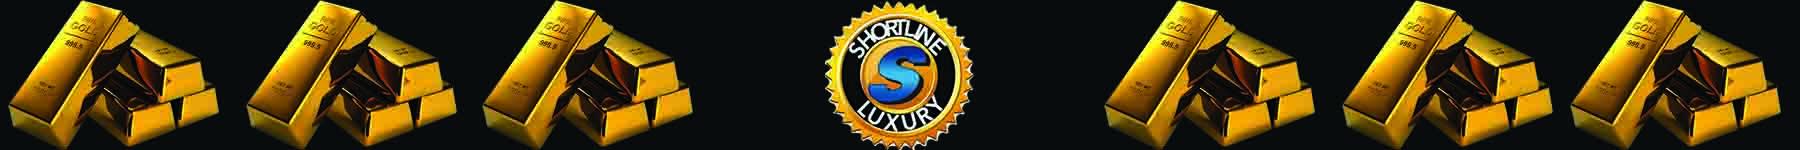 Shop Luxury Cars at SHortline BUick-GMC